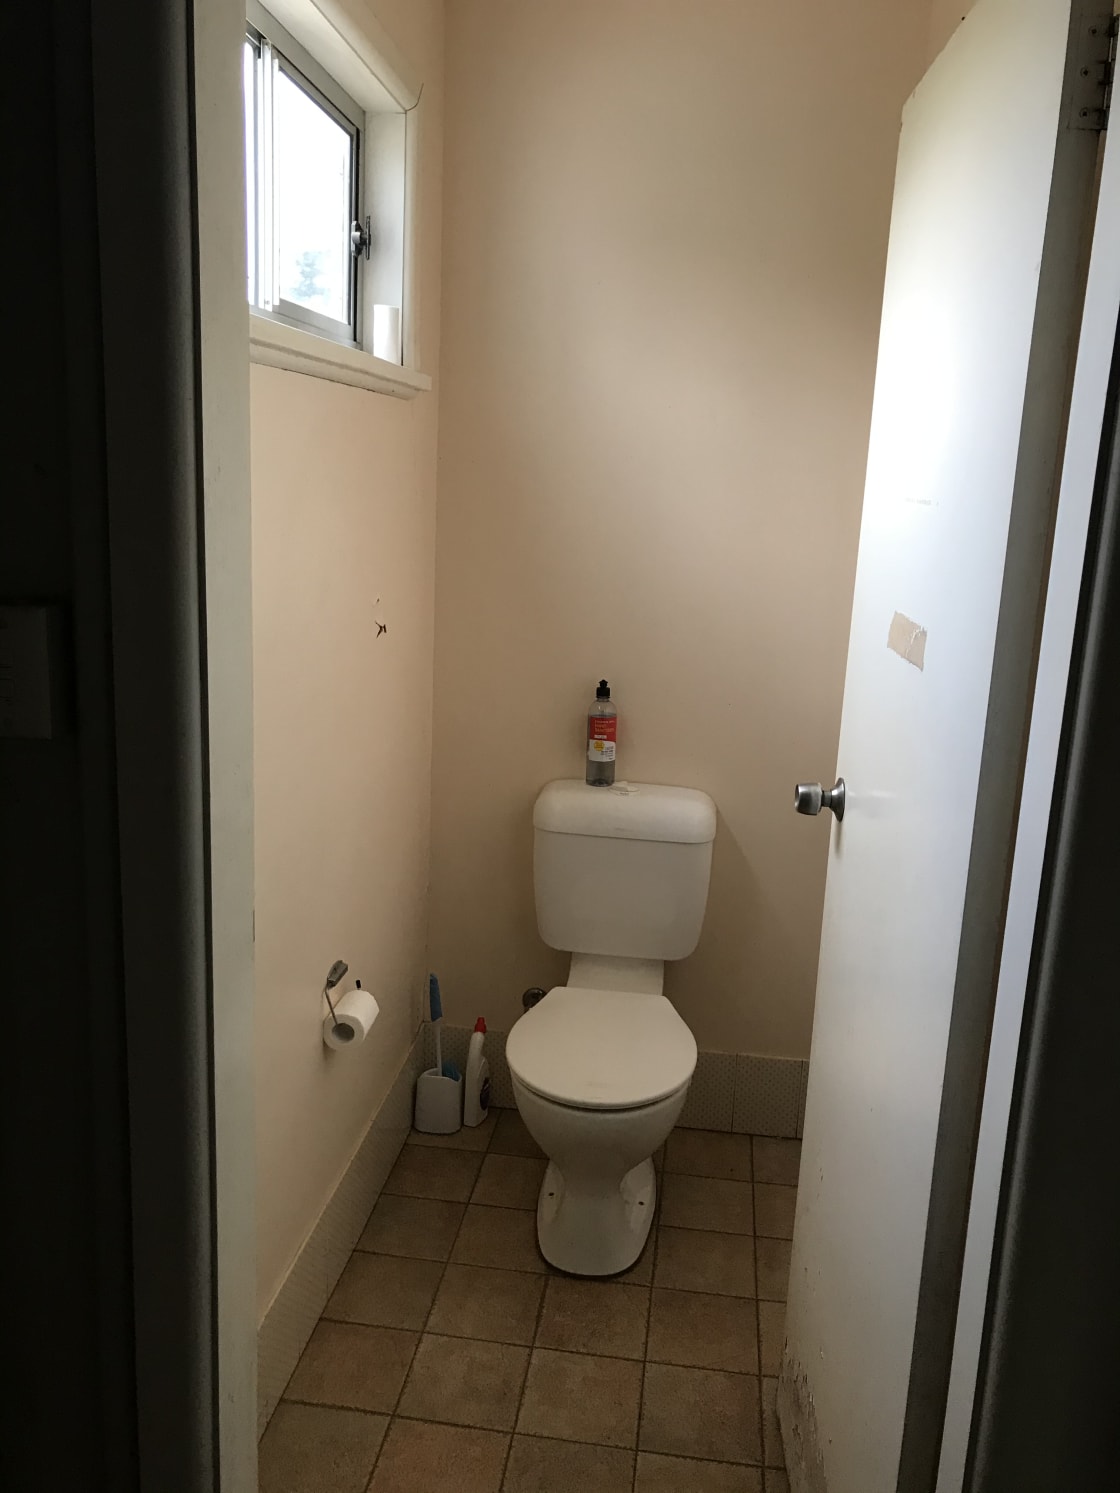 We have two toilets, one outside of utility complex and one inside.
COVID cleaned every day 